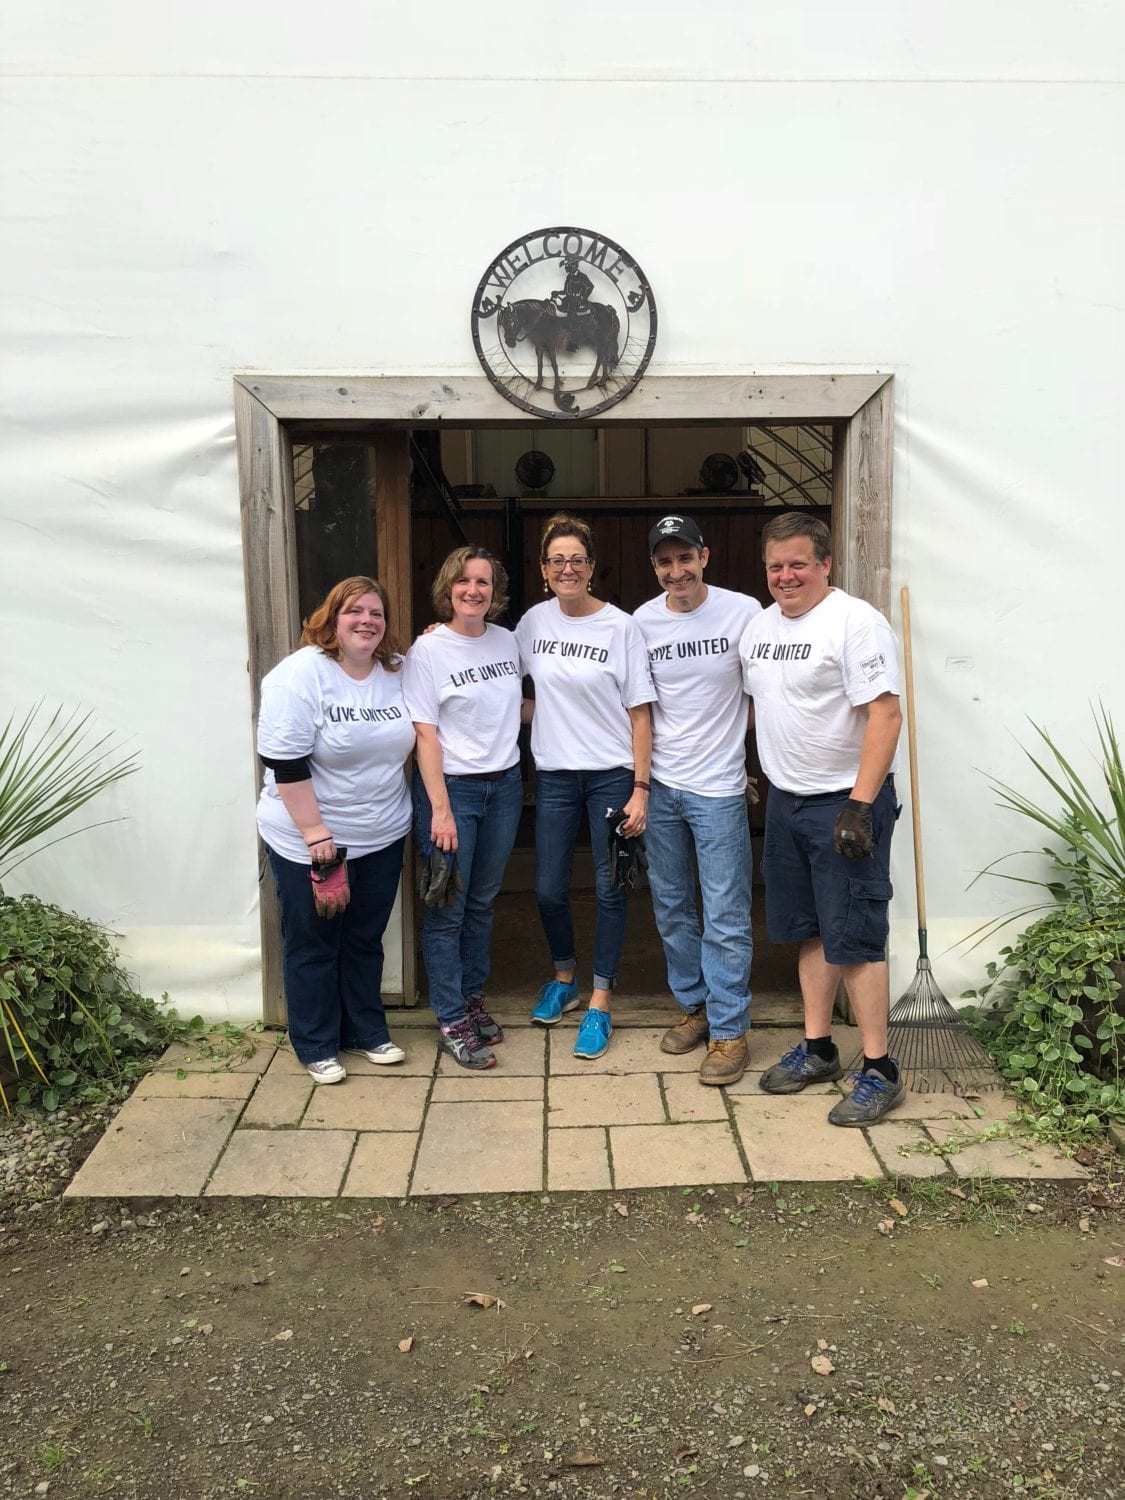 #TeamSUNYBroome Serving our Community at United Way’s Day of Caring